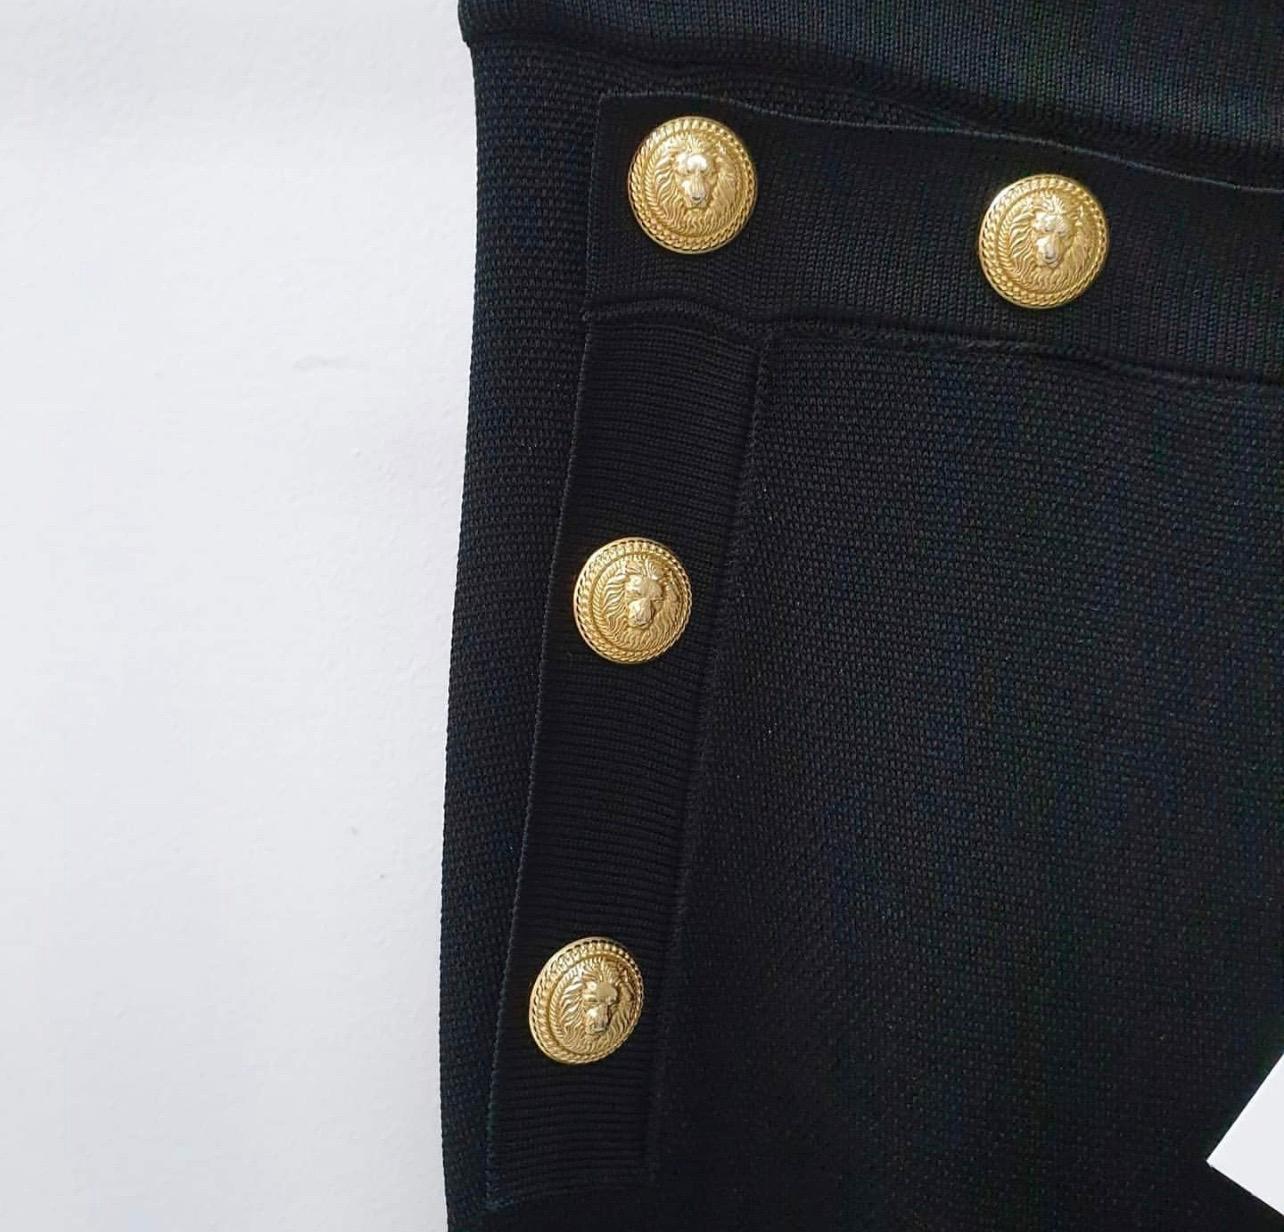 Black flared pants with gold-tone double-breasted closure
Black viscose pants
High waist, raglan side pockets, embossed gold-tone buttons, flared cut.
Sz.36
Condition is never worn with tags.
For buyers from EU we can provide shipping from Poland.